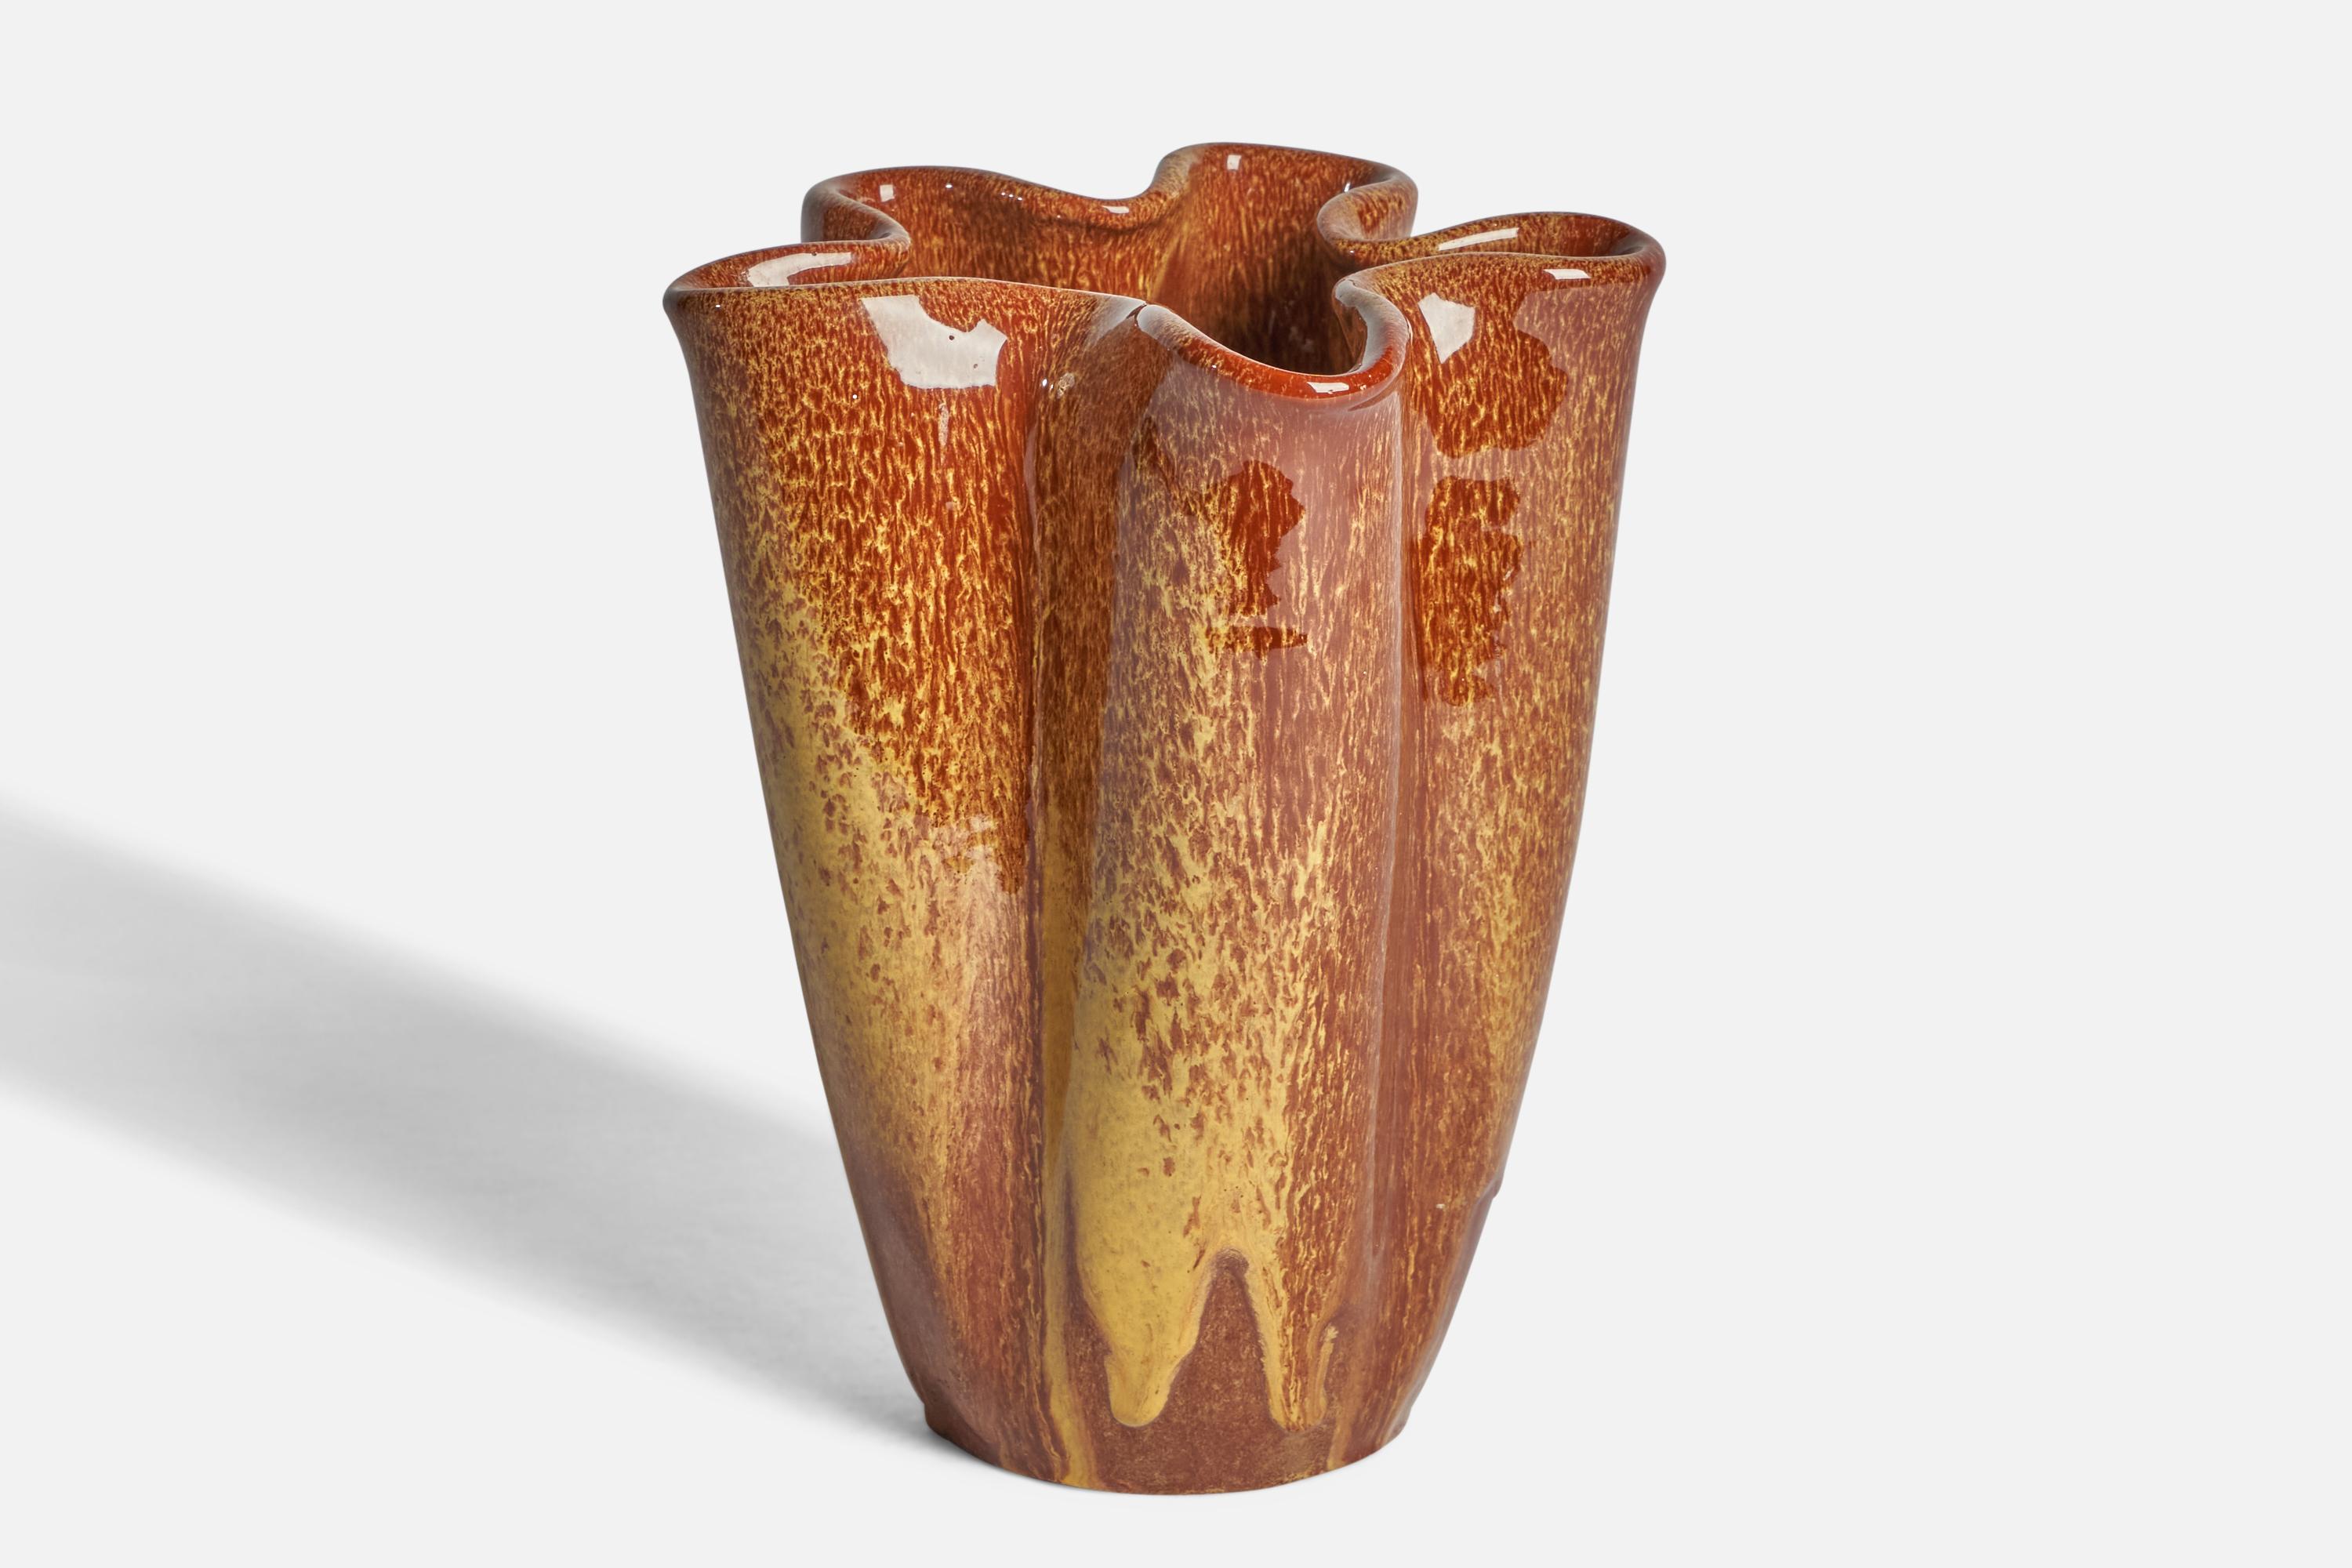 A brown and yellow-glazed earthenware vase designed by Vicke Lindstrand and produced by Upsala Ekeby, Sweden, 1930s.

“341” stamp on bottom